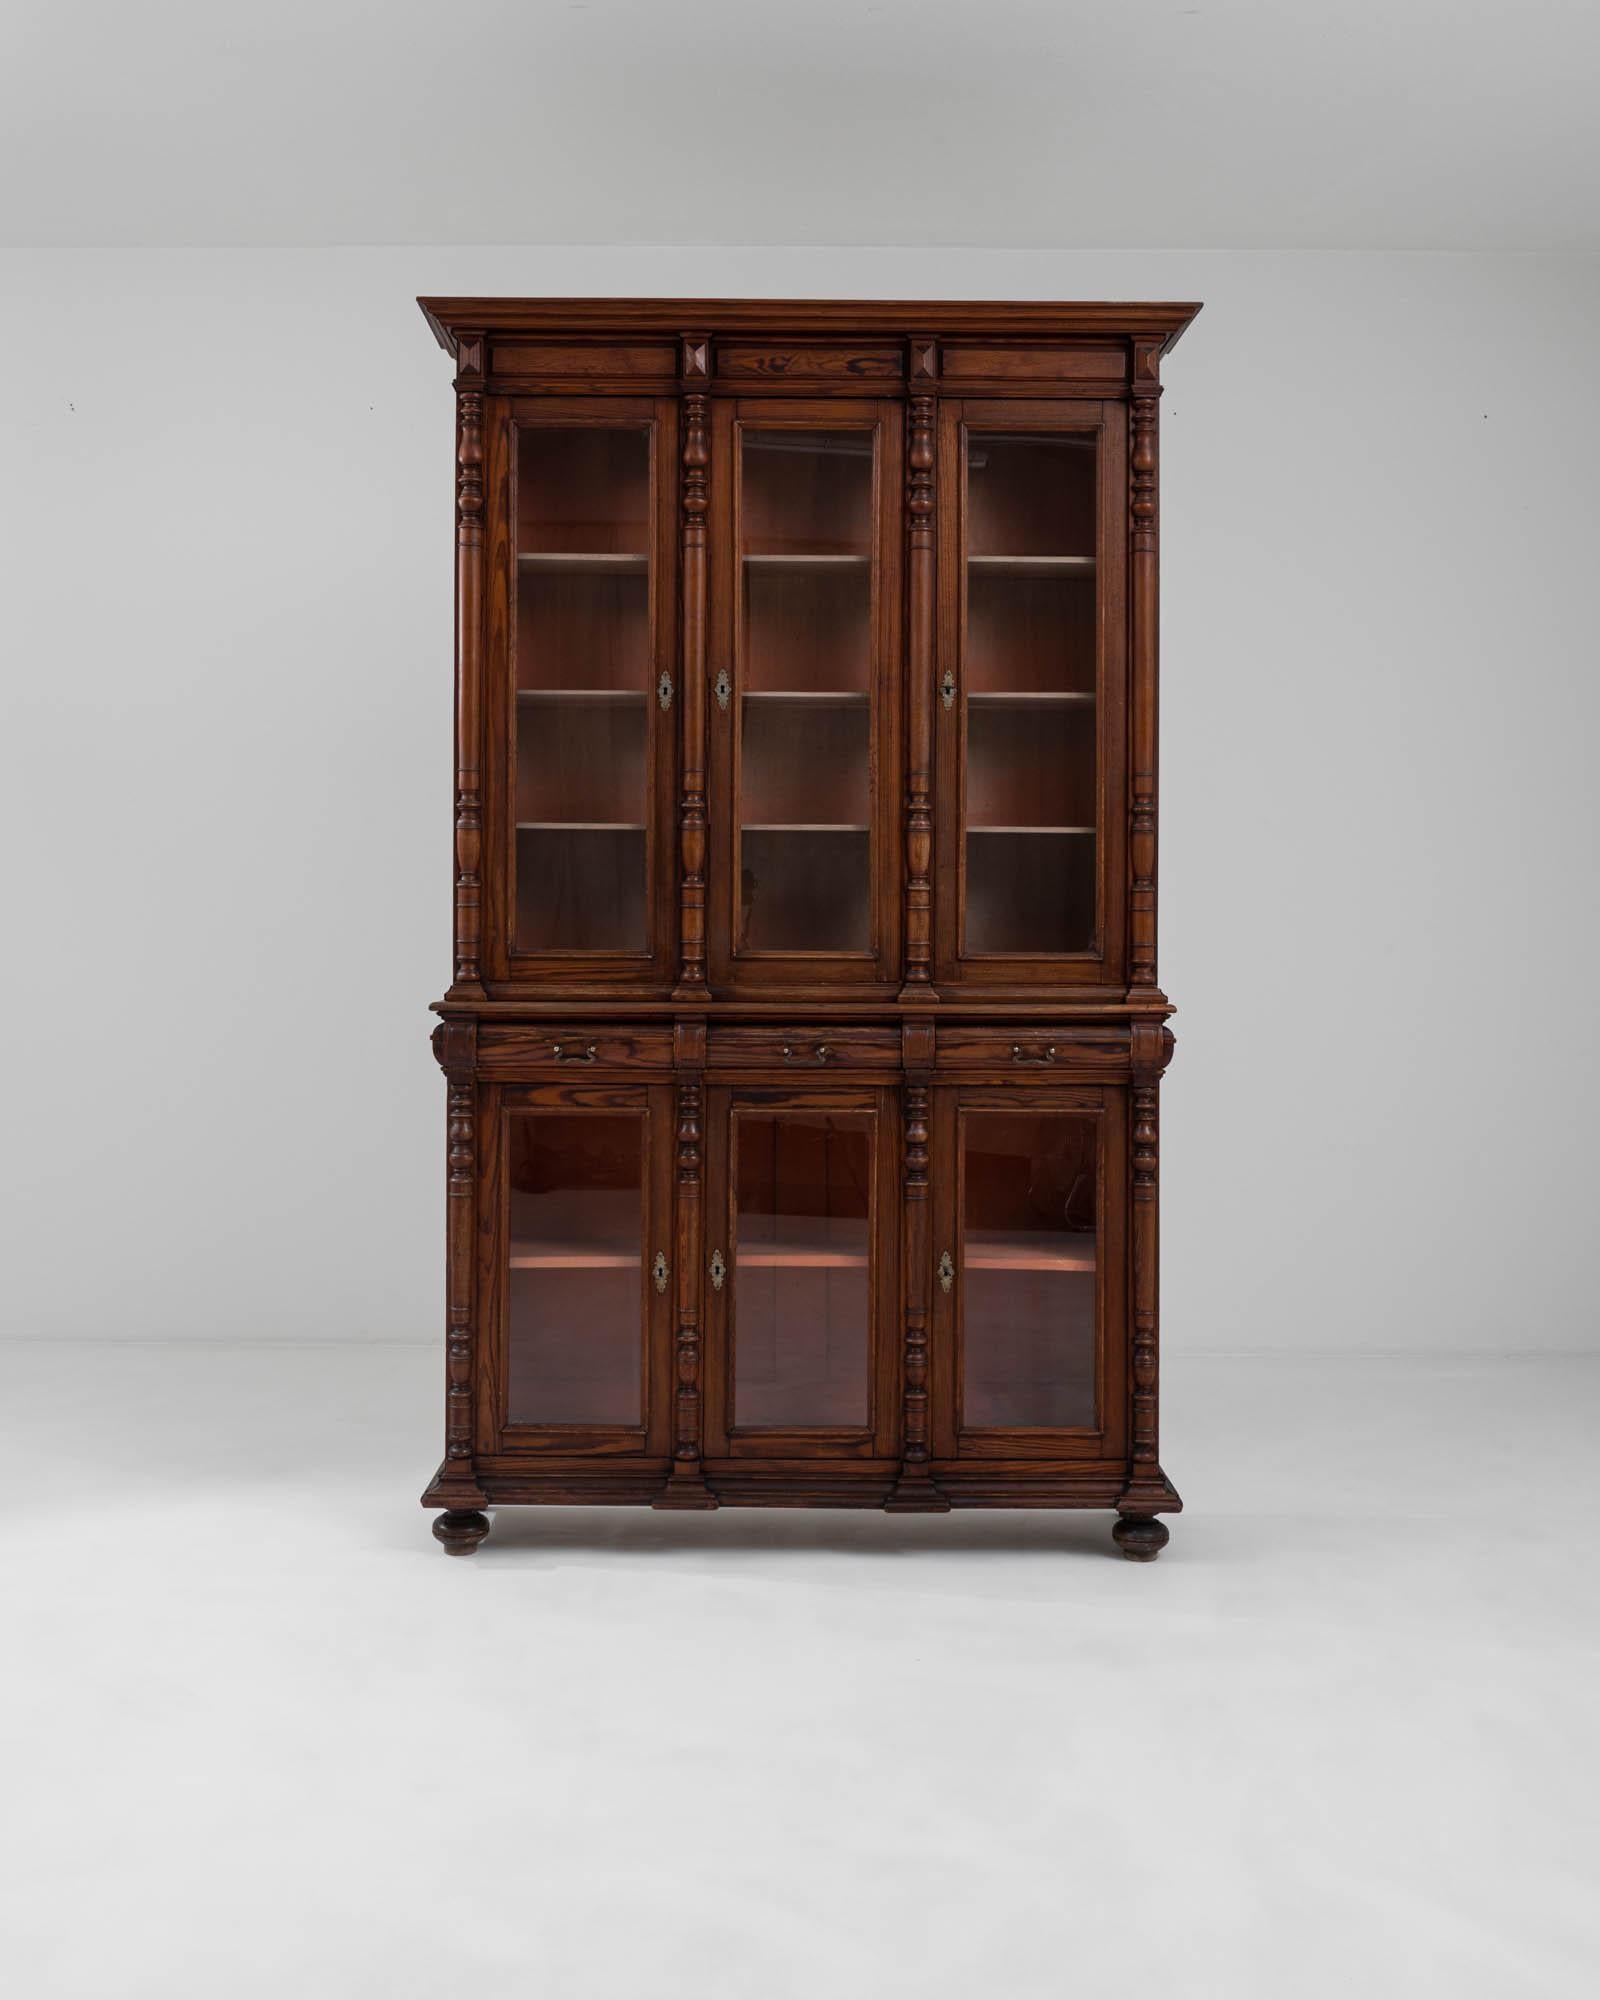 A wooden vitrine created in 1900s France. Towering above, this elegant find emits both an impressive display of elite craftsmanship and a warm and approachable familiarity. The semi-cylindrical columns that separate the shelves add a touch of artful